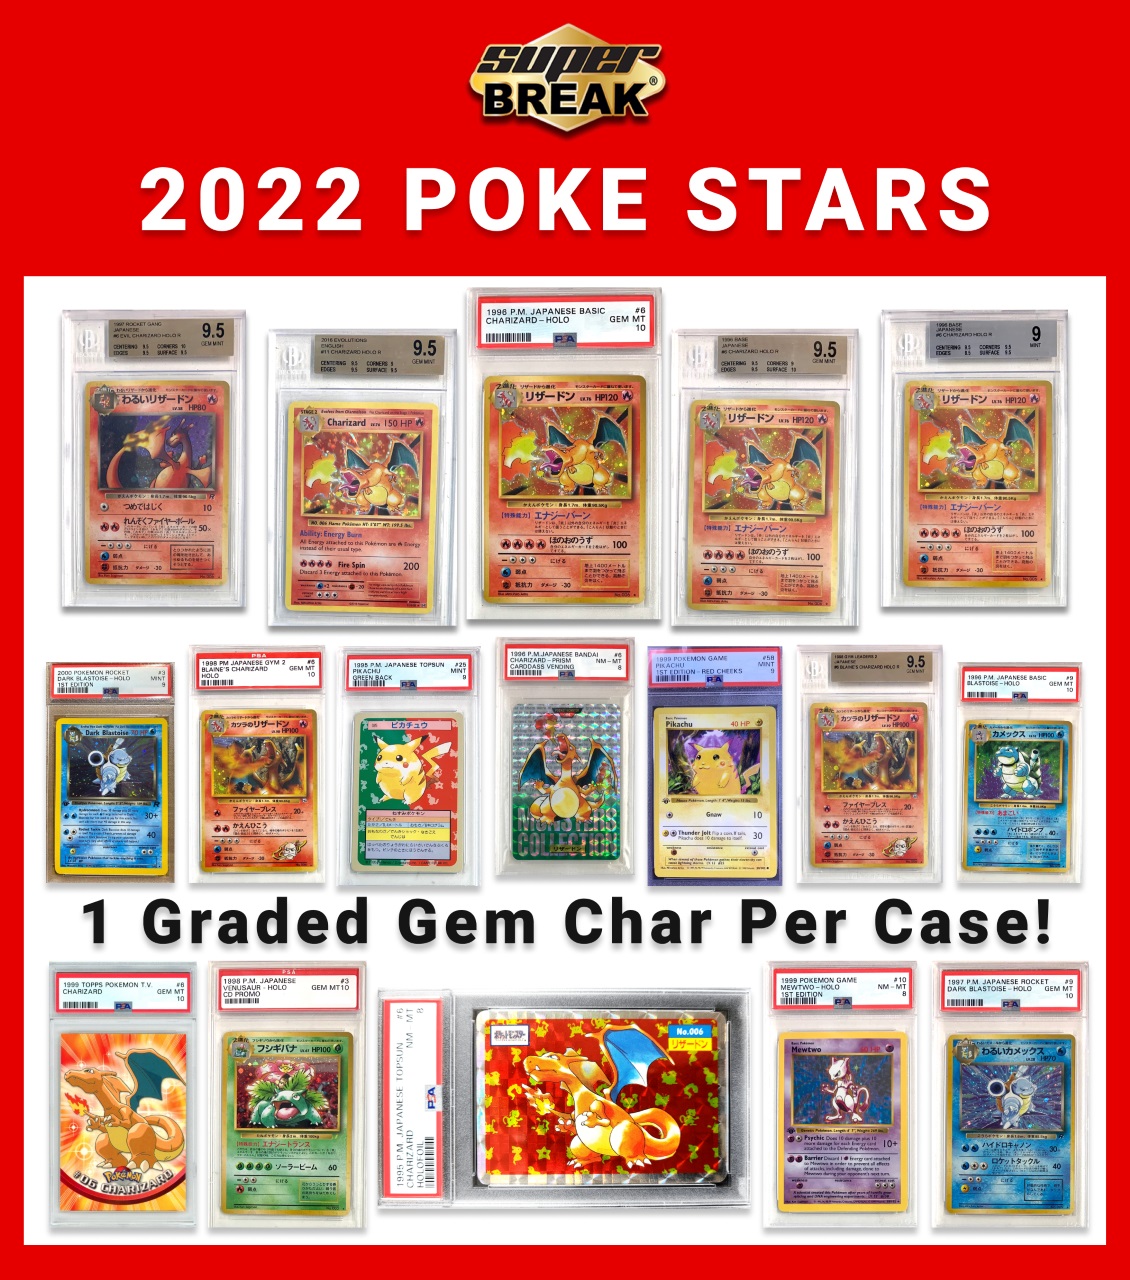 2022 Super Break Pokemon Poke Stars Buyback Edition Box - ONLY CONTAINS 1 CARD